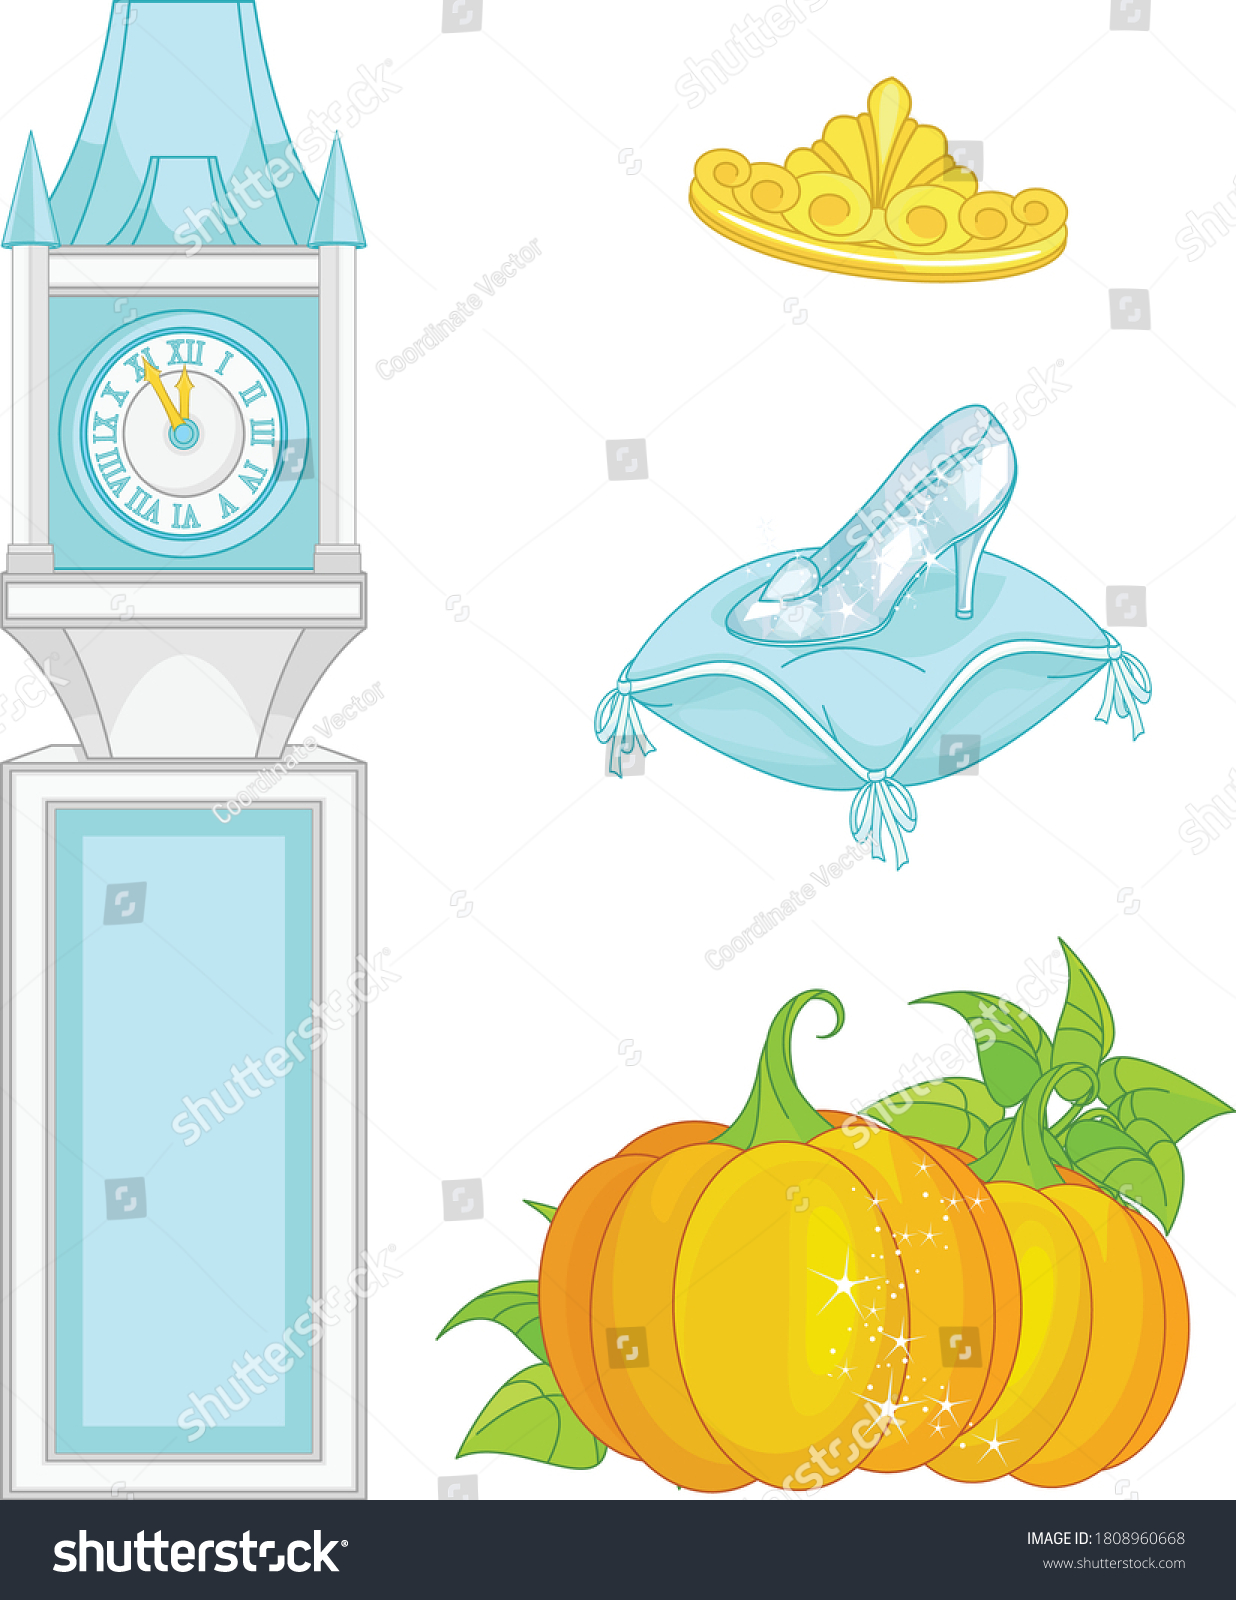 SVG of Fairy tale theme. Collection of decorative design elements. Isolated objects svg